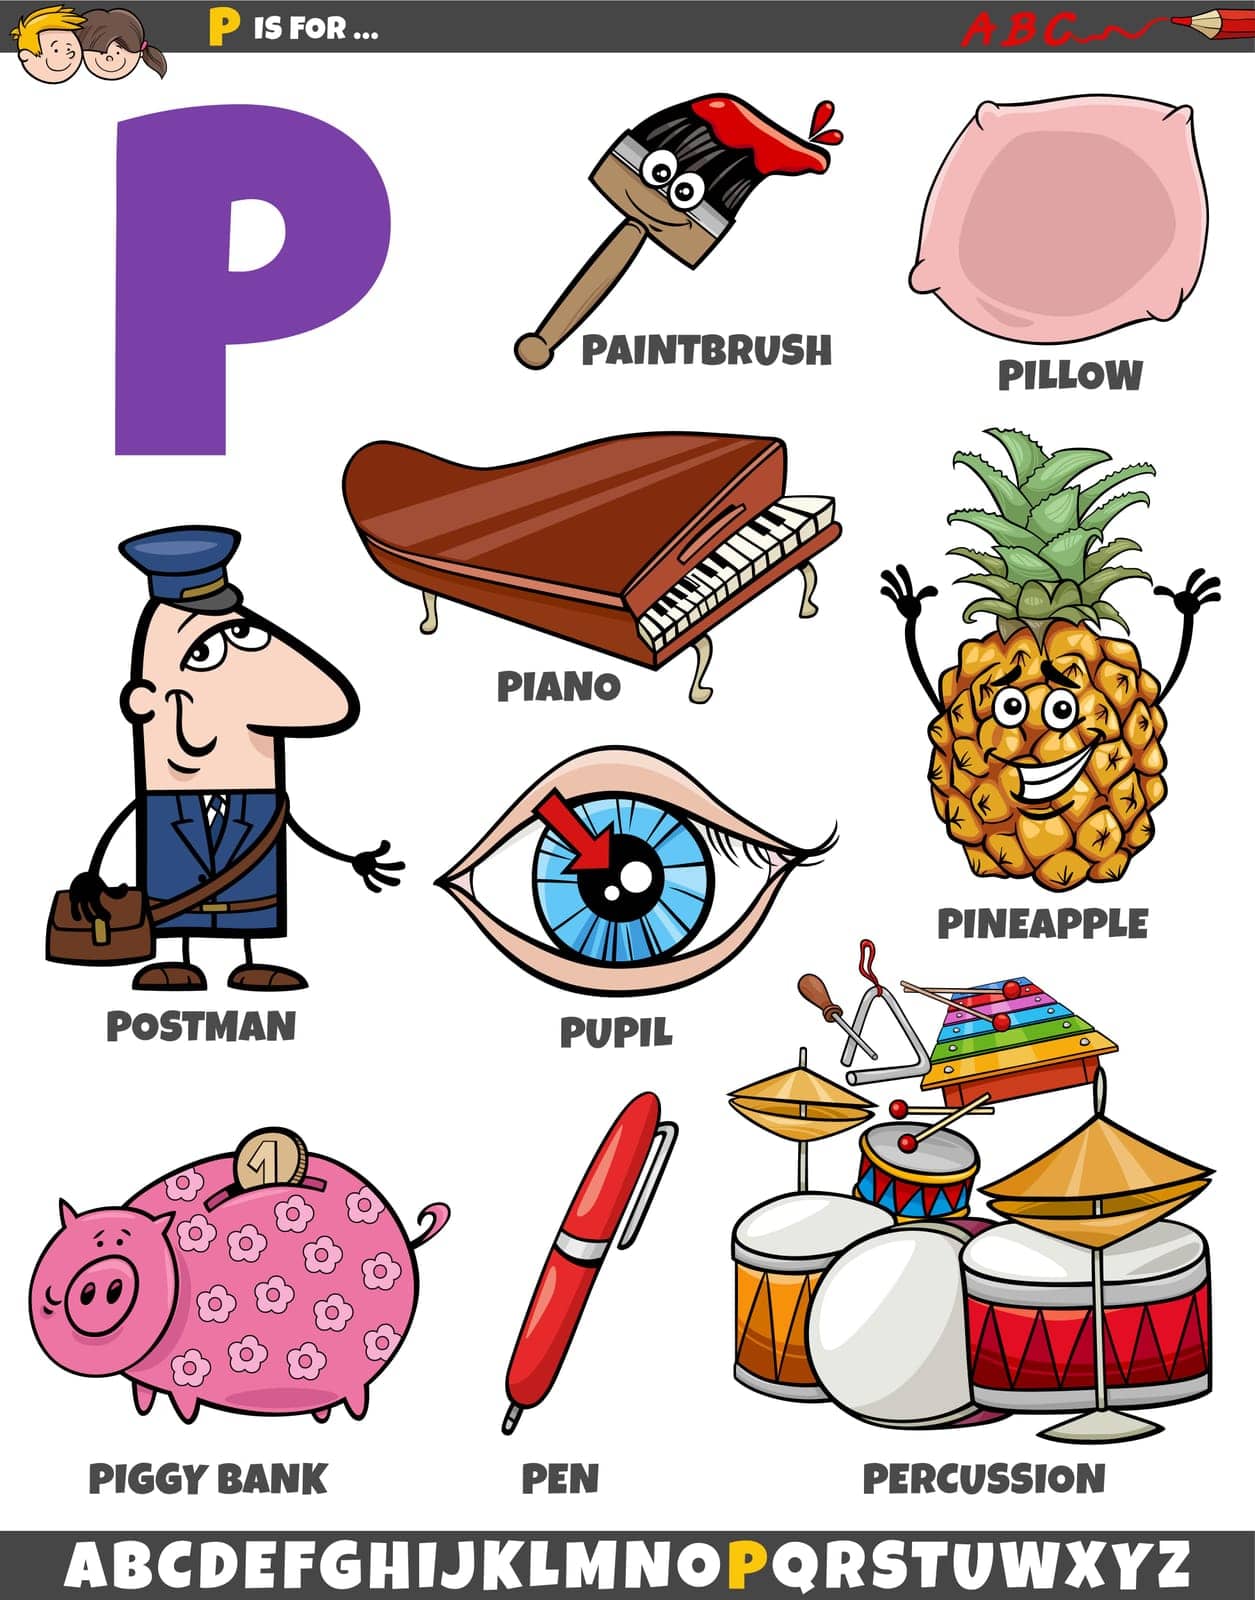 Letter P set with cartoon objects and characters by izakowski